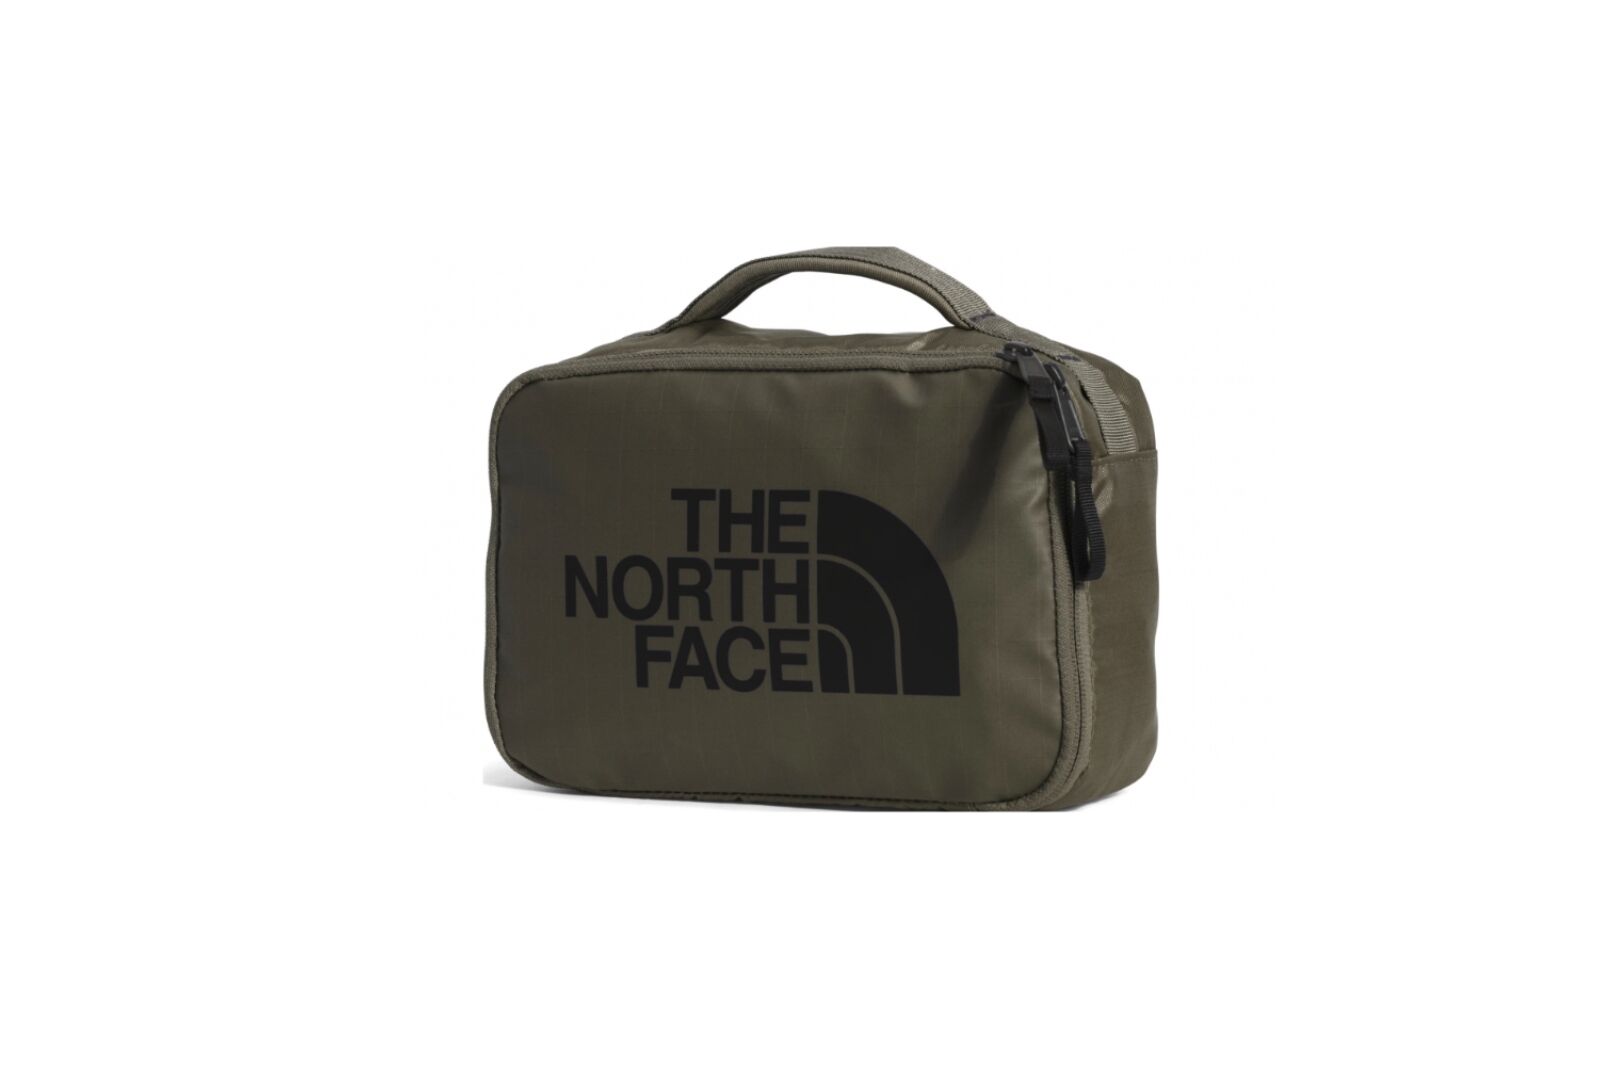 The North Face Base Camp Voyager dopp kit one of the best packing organizers 